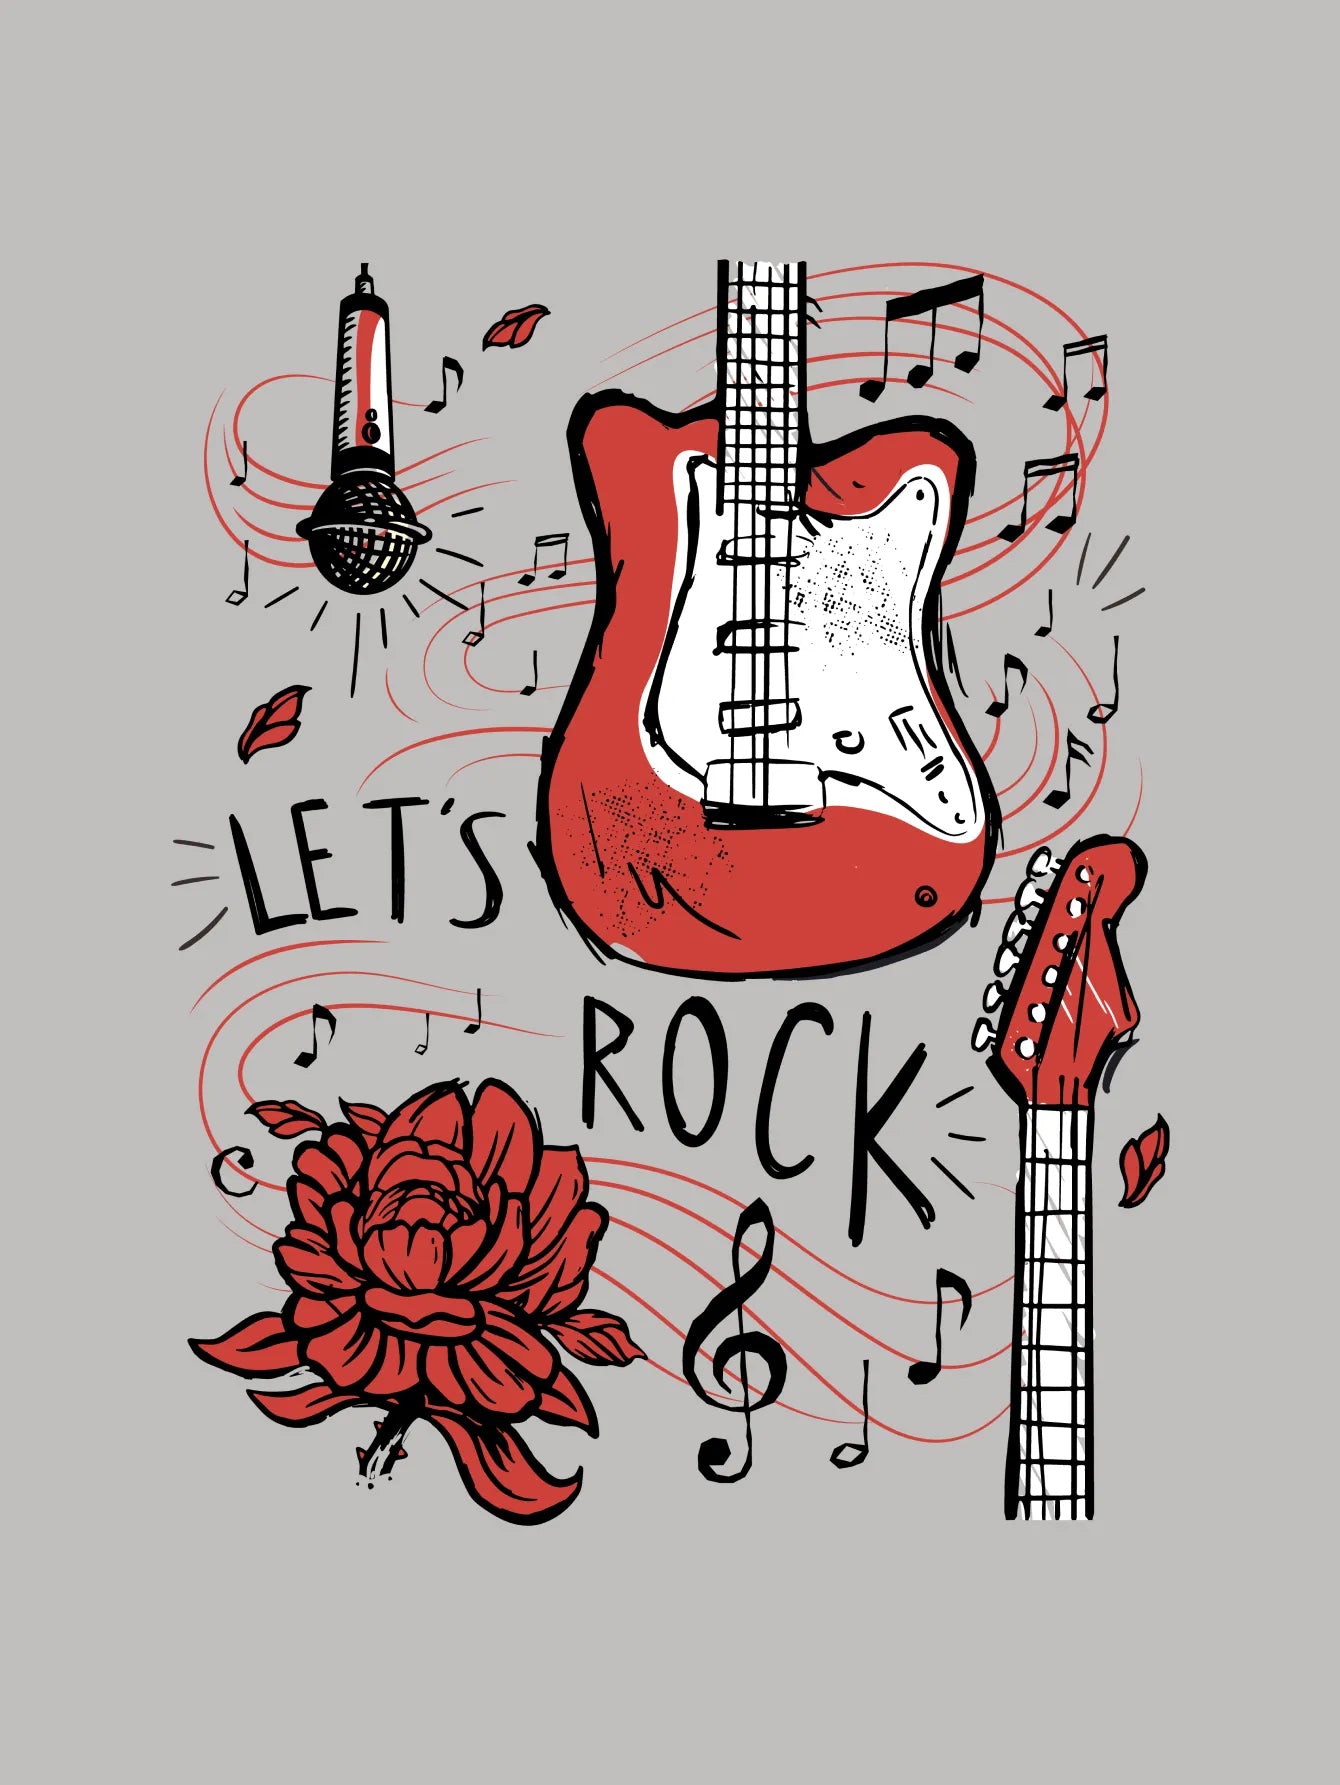 An Electric Guitar, Microphone and Rose with The Quote